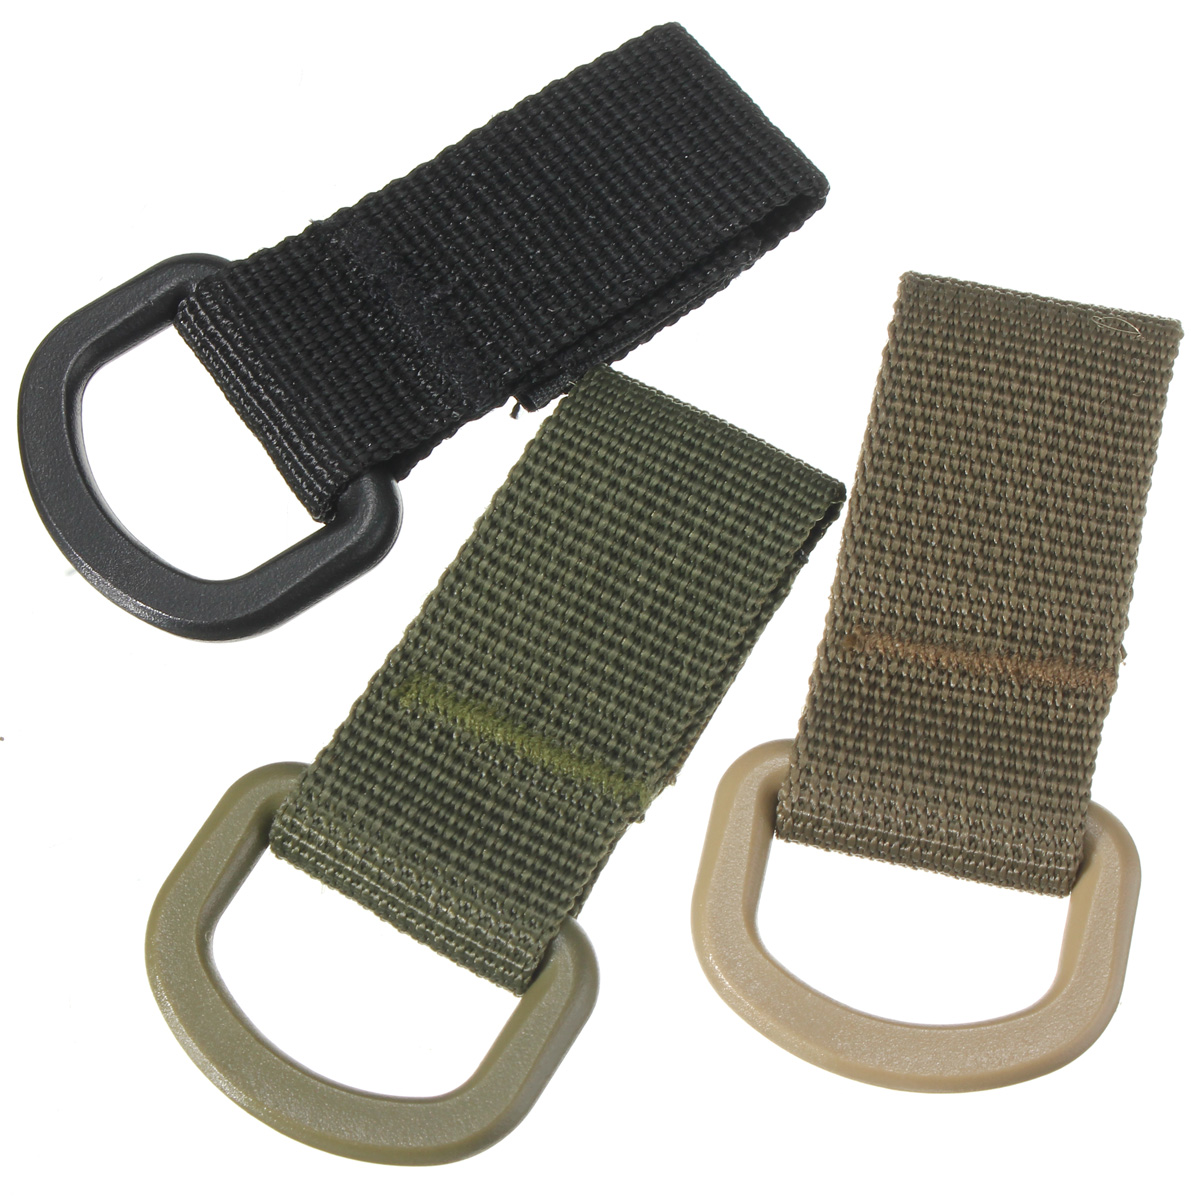 Military-Tactical-Carabiner-Nylon-Strap-Buckle-Hook-Belt-Hanging-Keychain-D-shaped-Ring-Molle-System-1028668-3